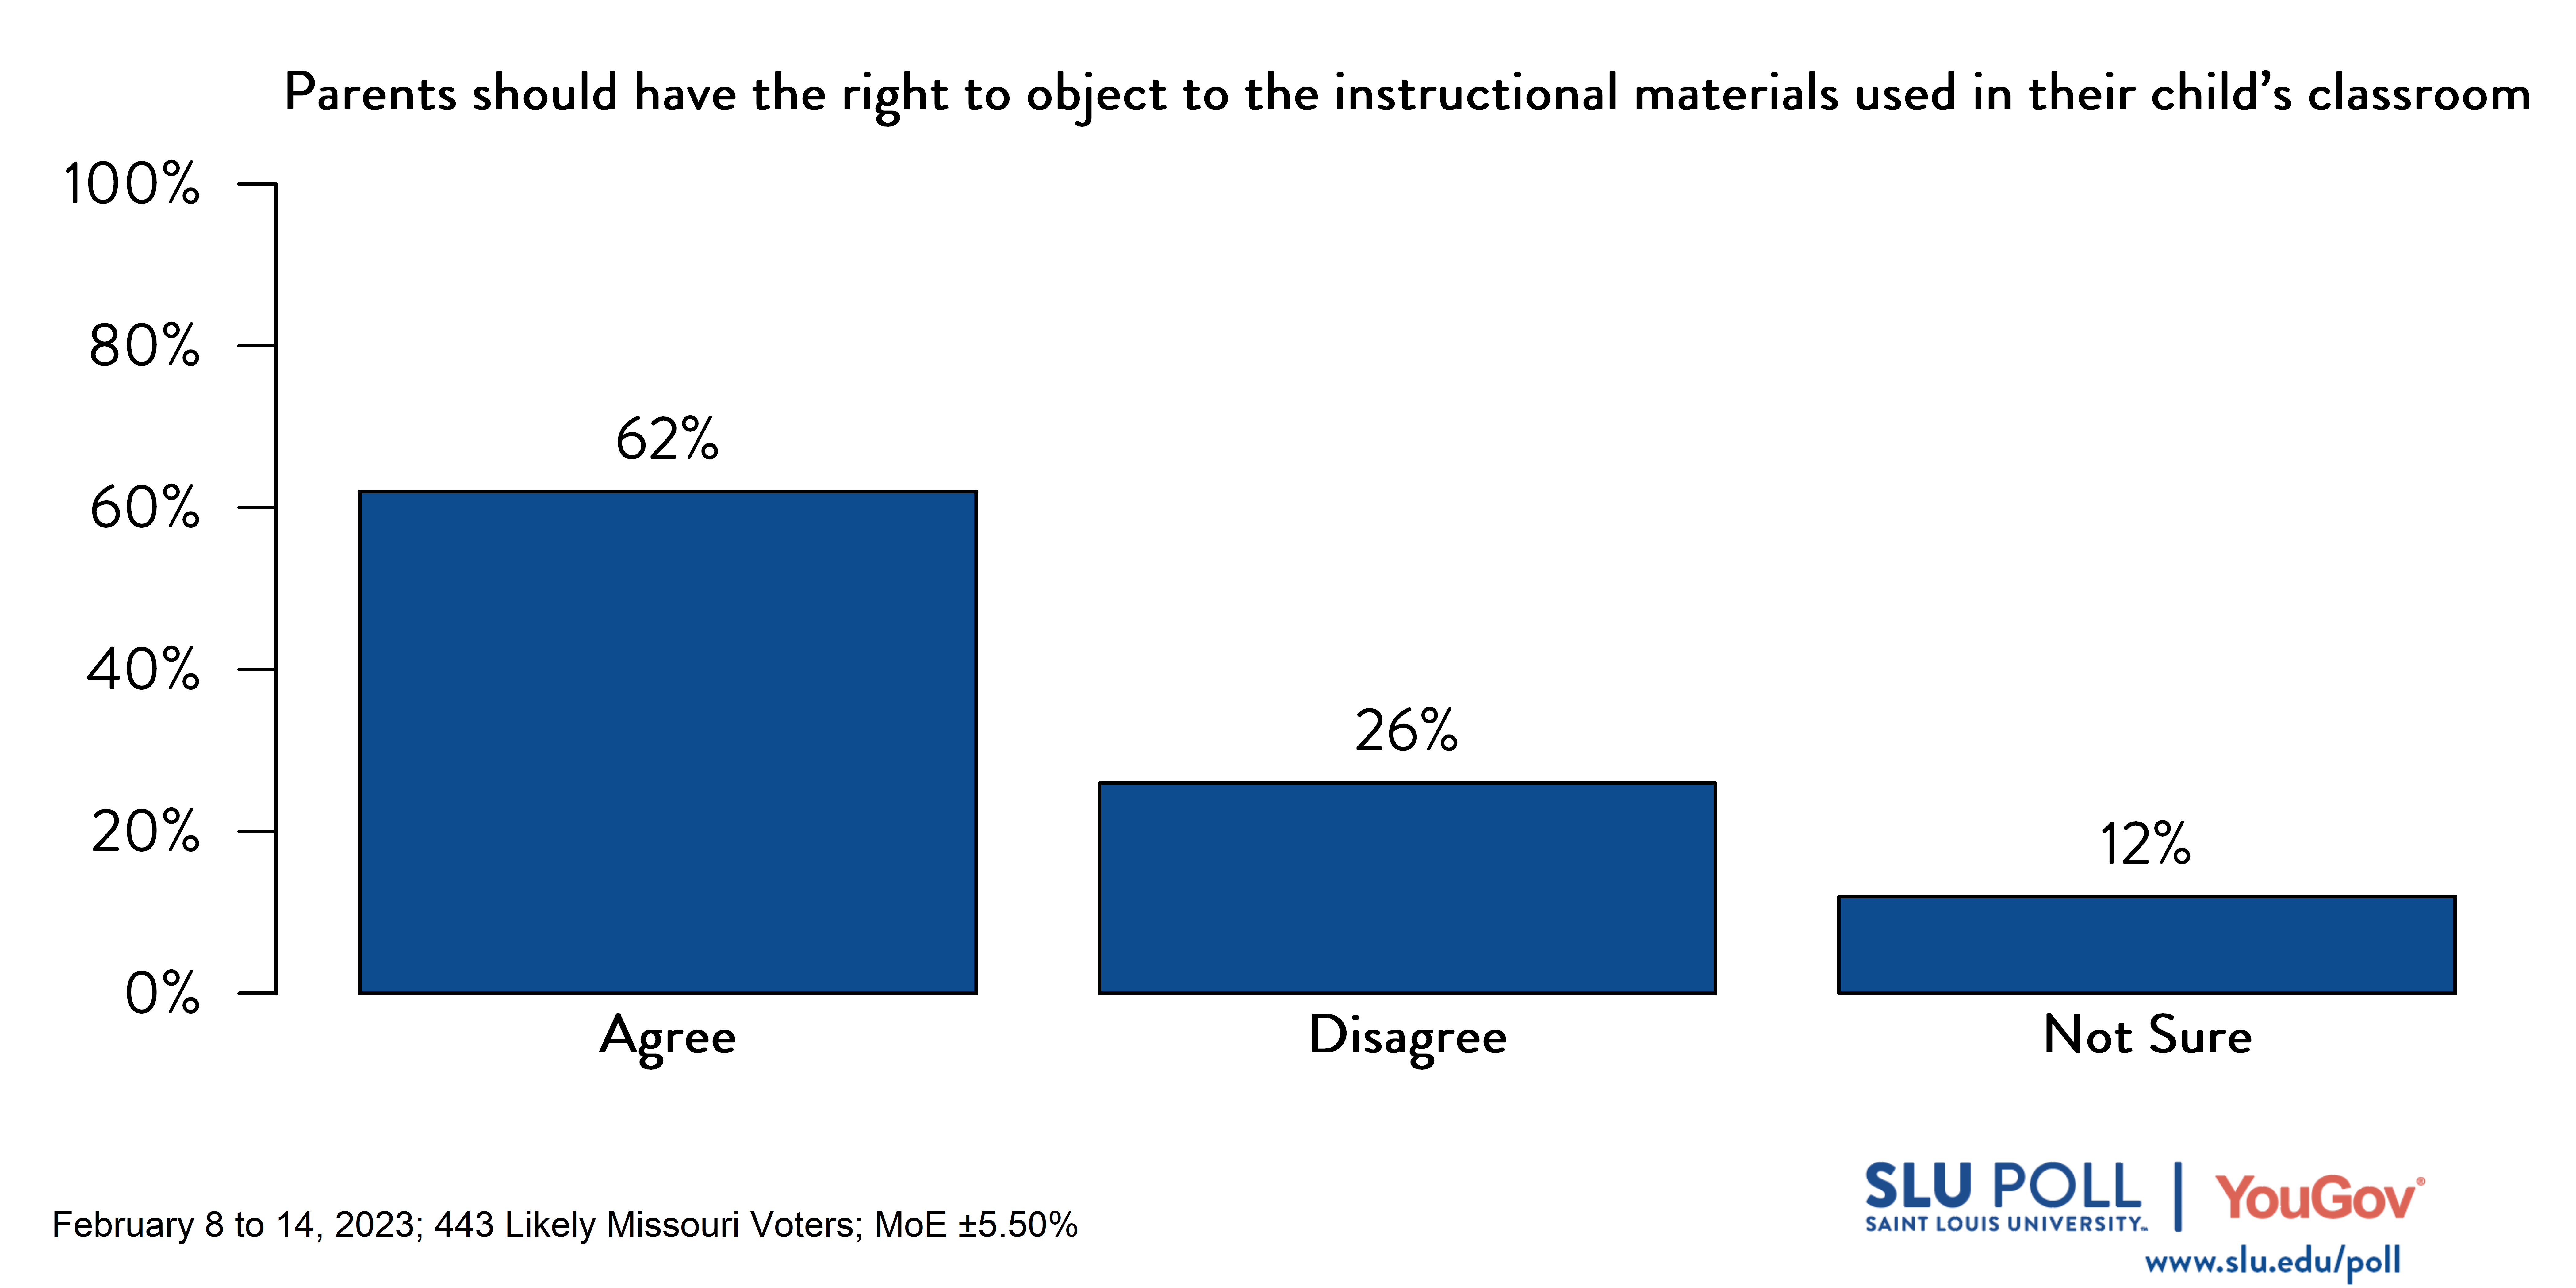 Likely voters' responses to 'Do you agree or disagree with the following statements: Parents of students should have the right to object to the instructional materials used in their child's classroom?': 62% Agree, 26% Disagree, and 12% Not sure.